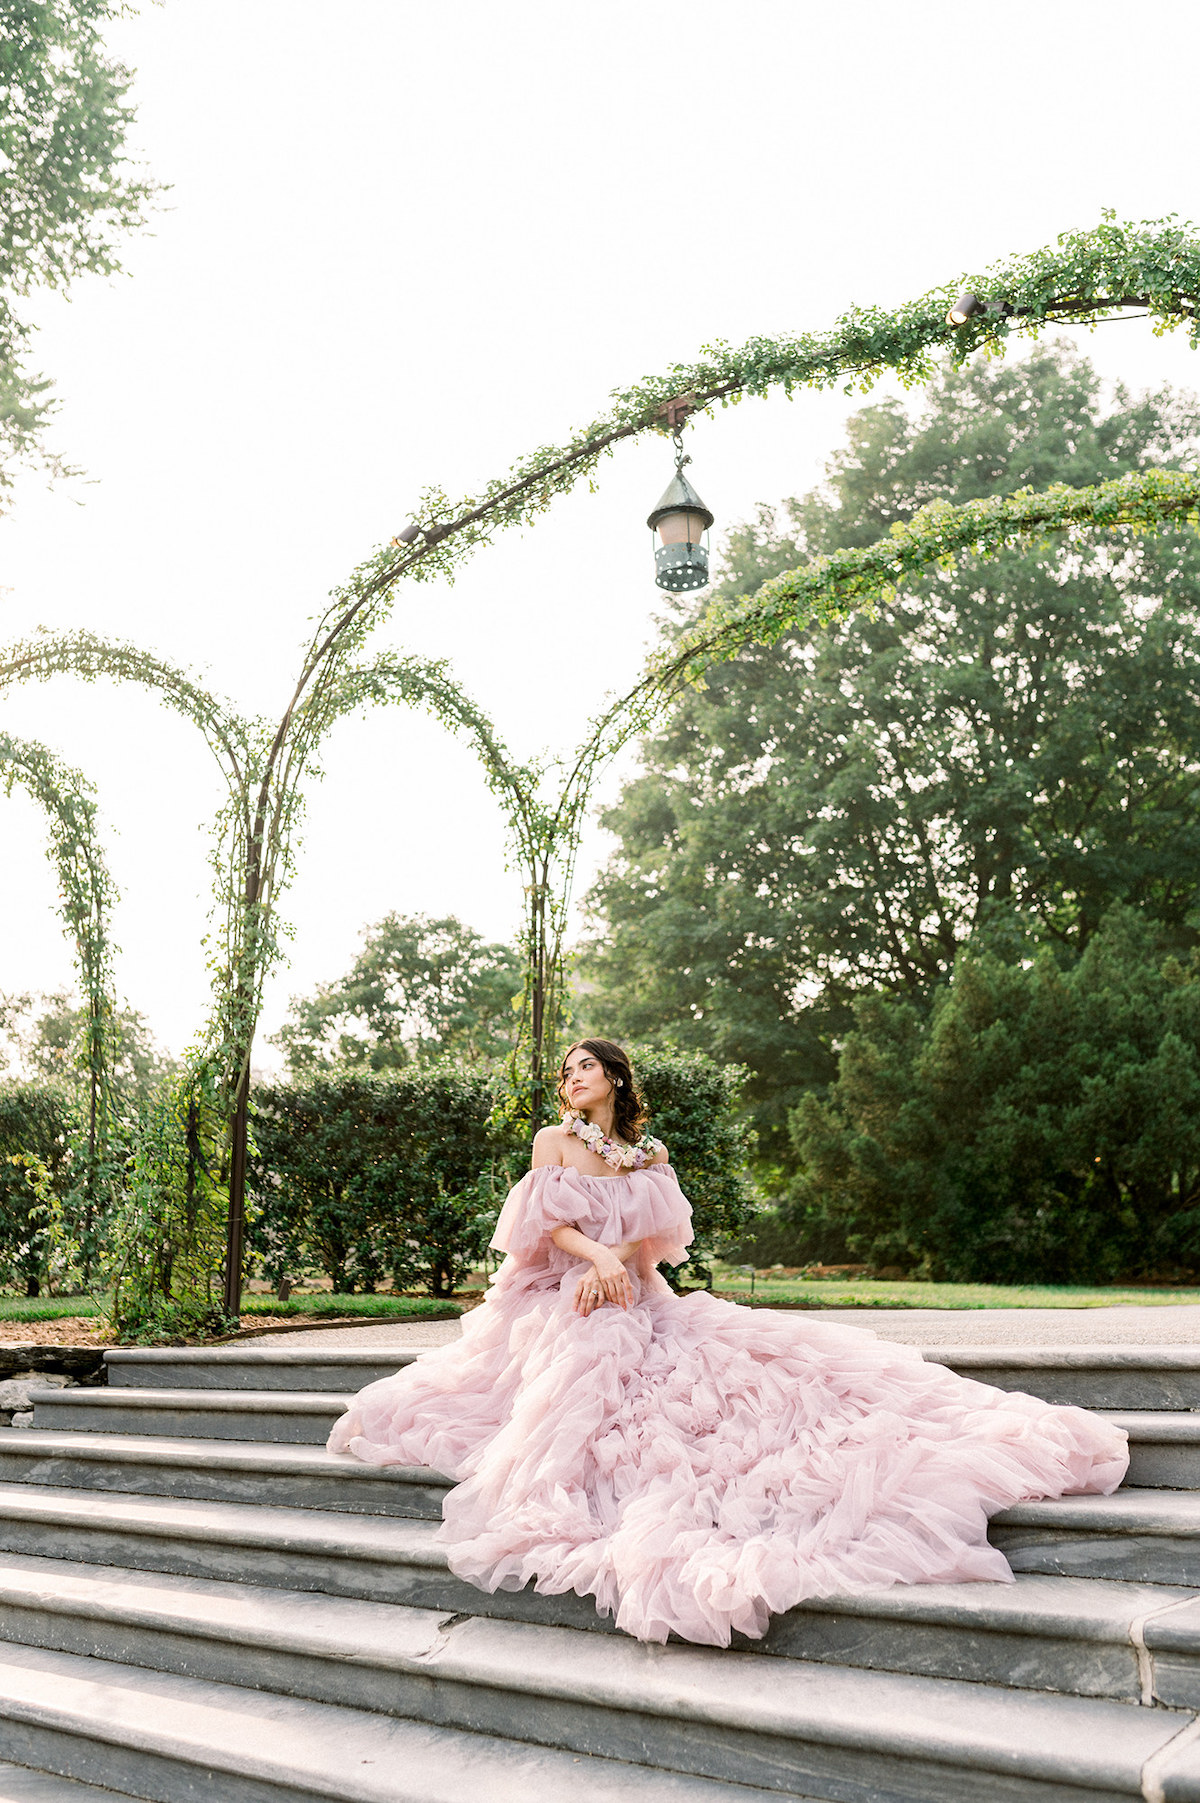 In the couture gown, Karla embodies the essence of a high-fashion model, her confident and striking pose commanding attention amid the beauty of Longwood Gardens.